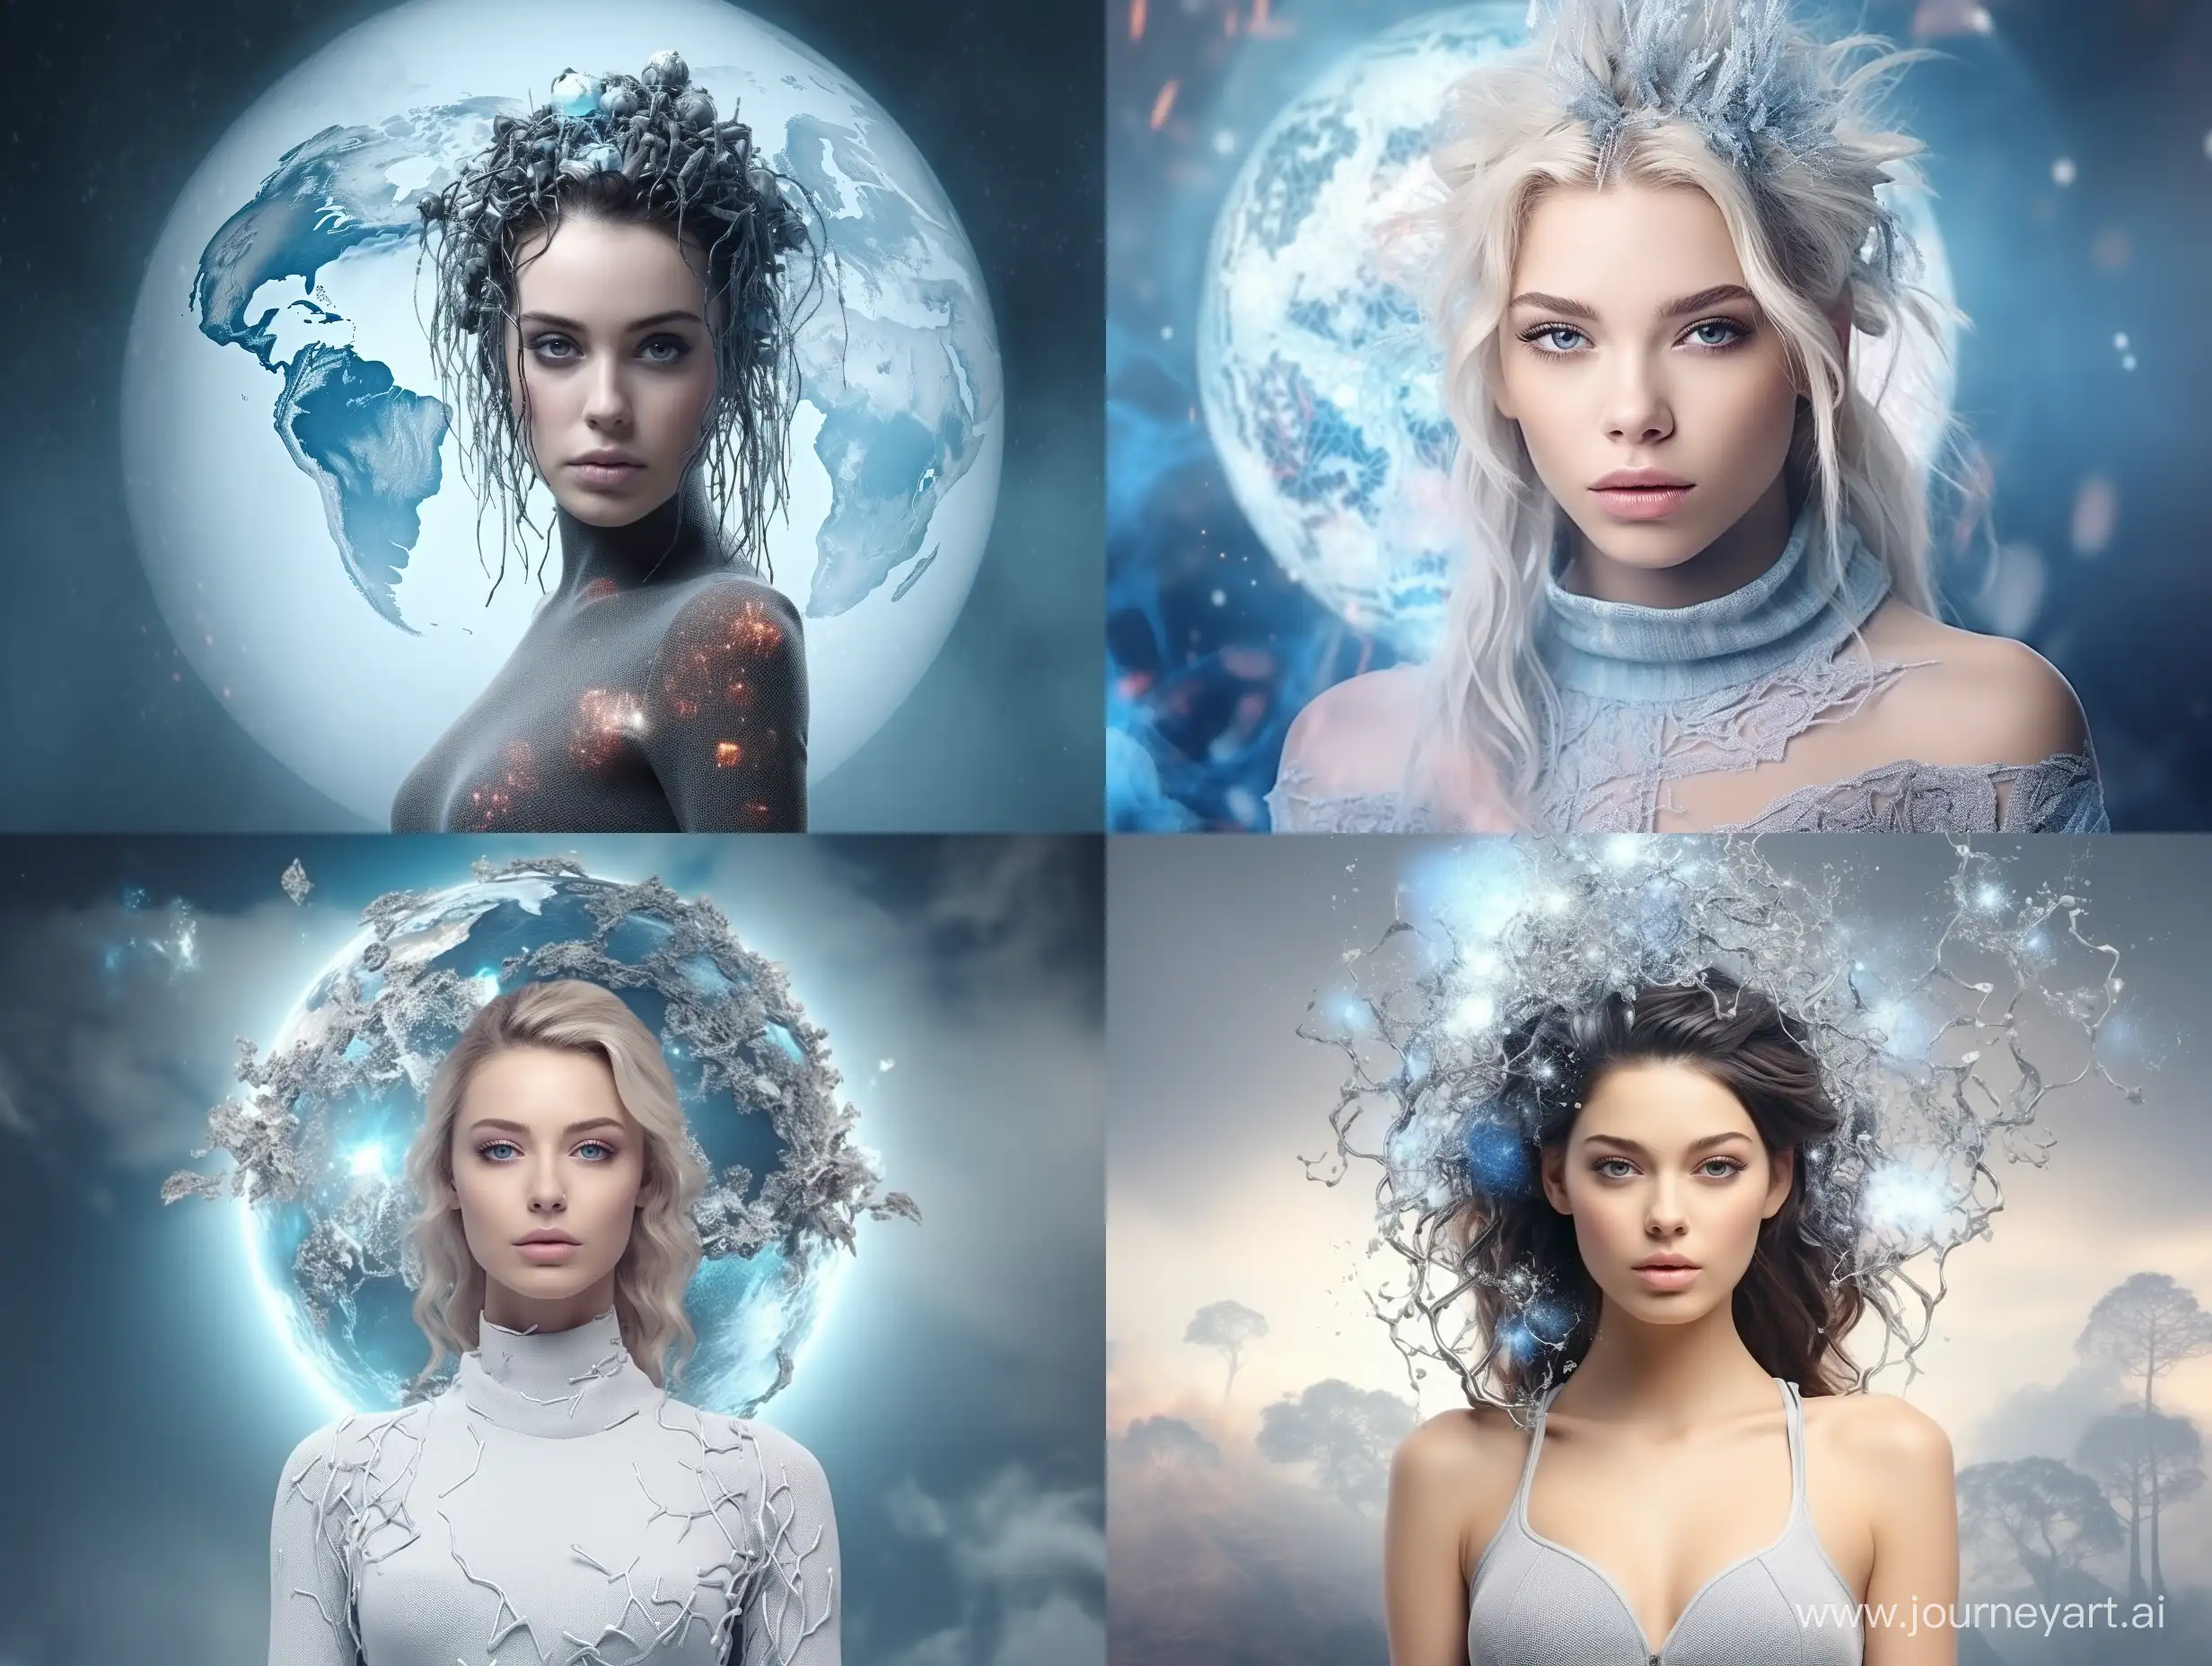 Neural network in the form of a beautiful girl with robot elements, close-up, neurons are generated around the head, fog, haze of bluish color, in the background a small globe-planet earth, shrouded in clouds